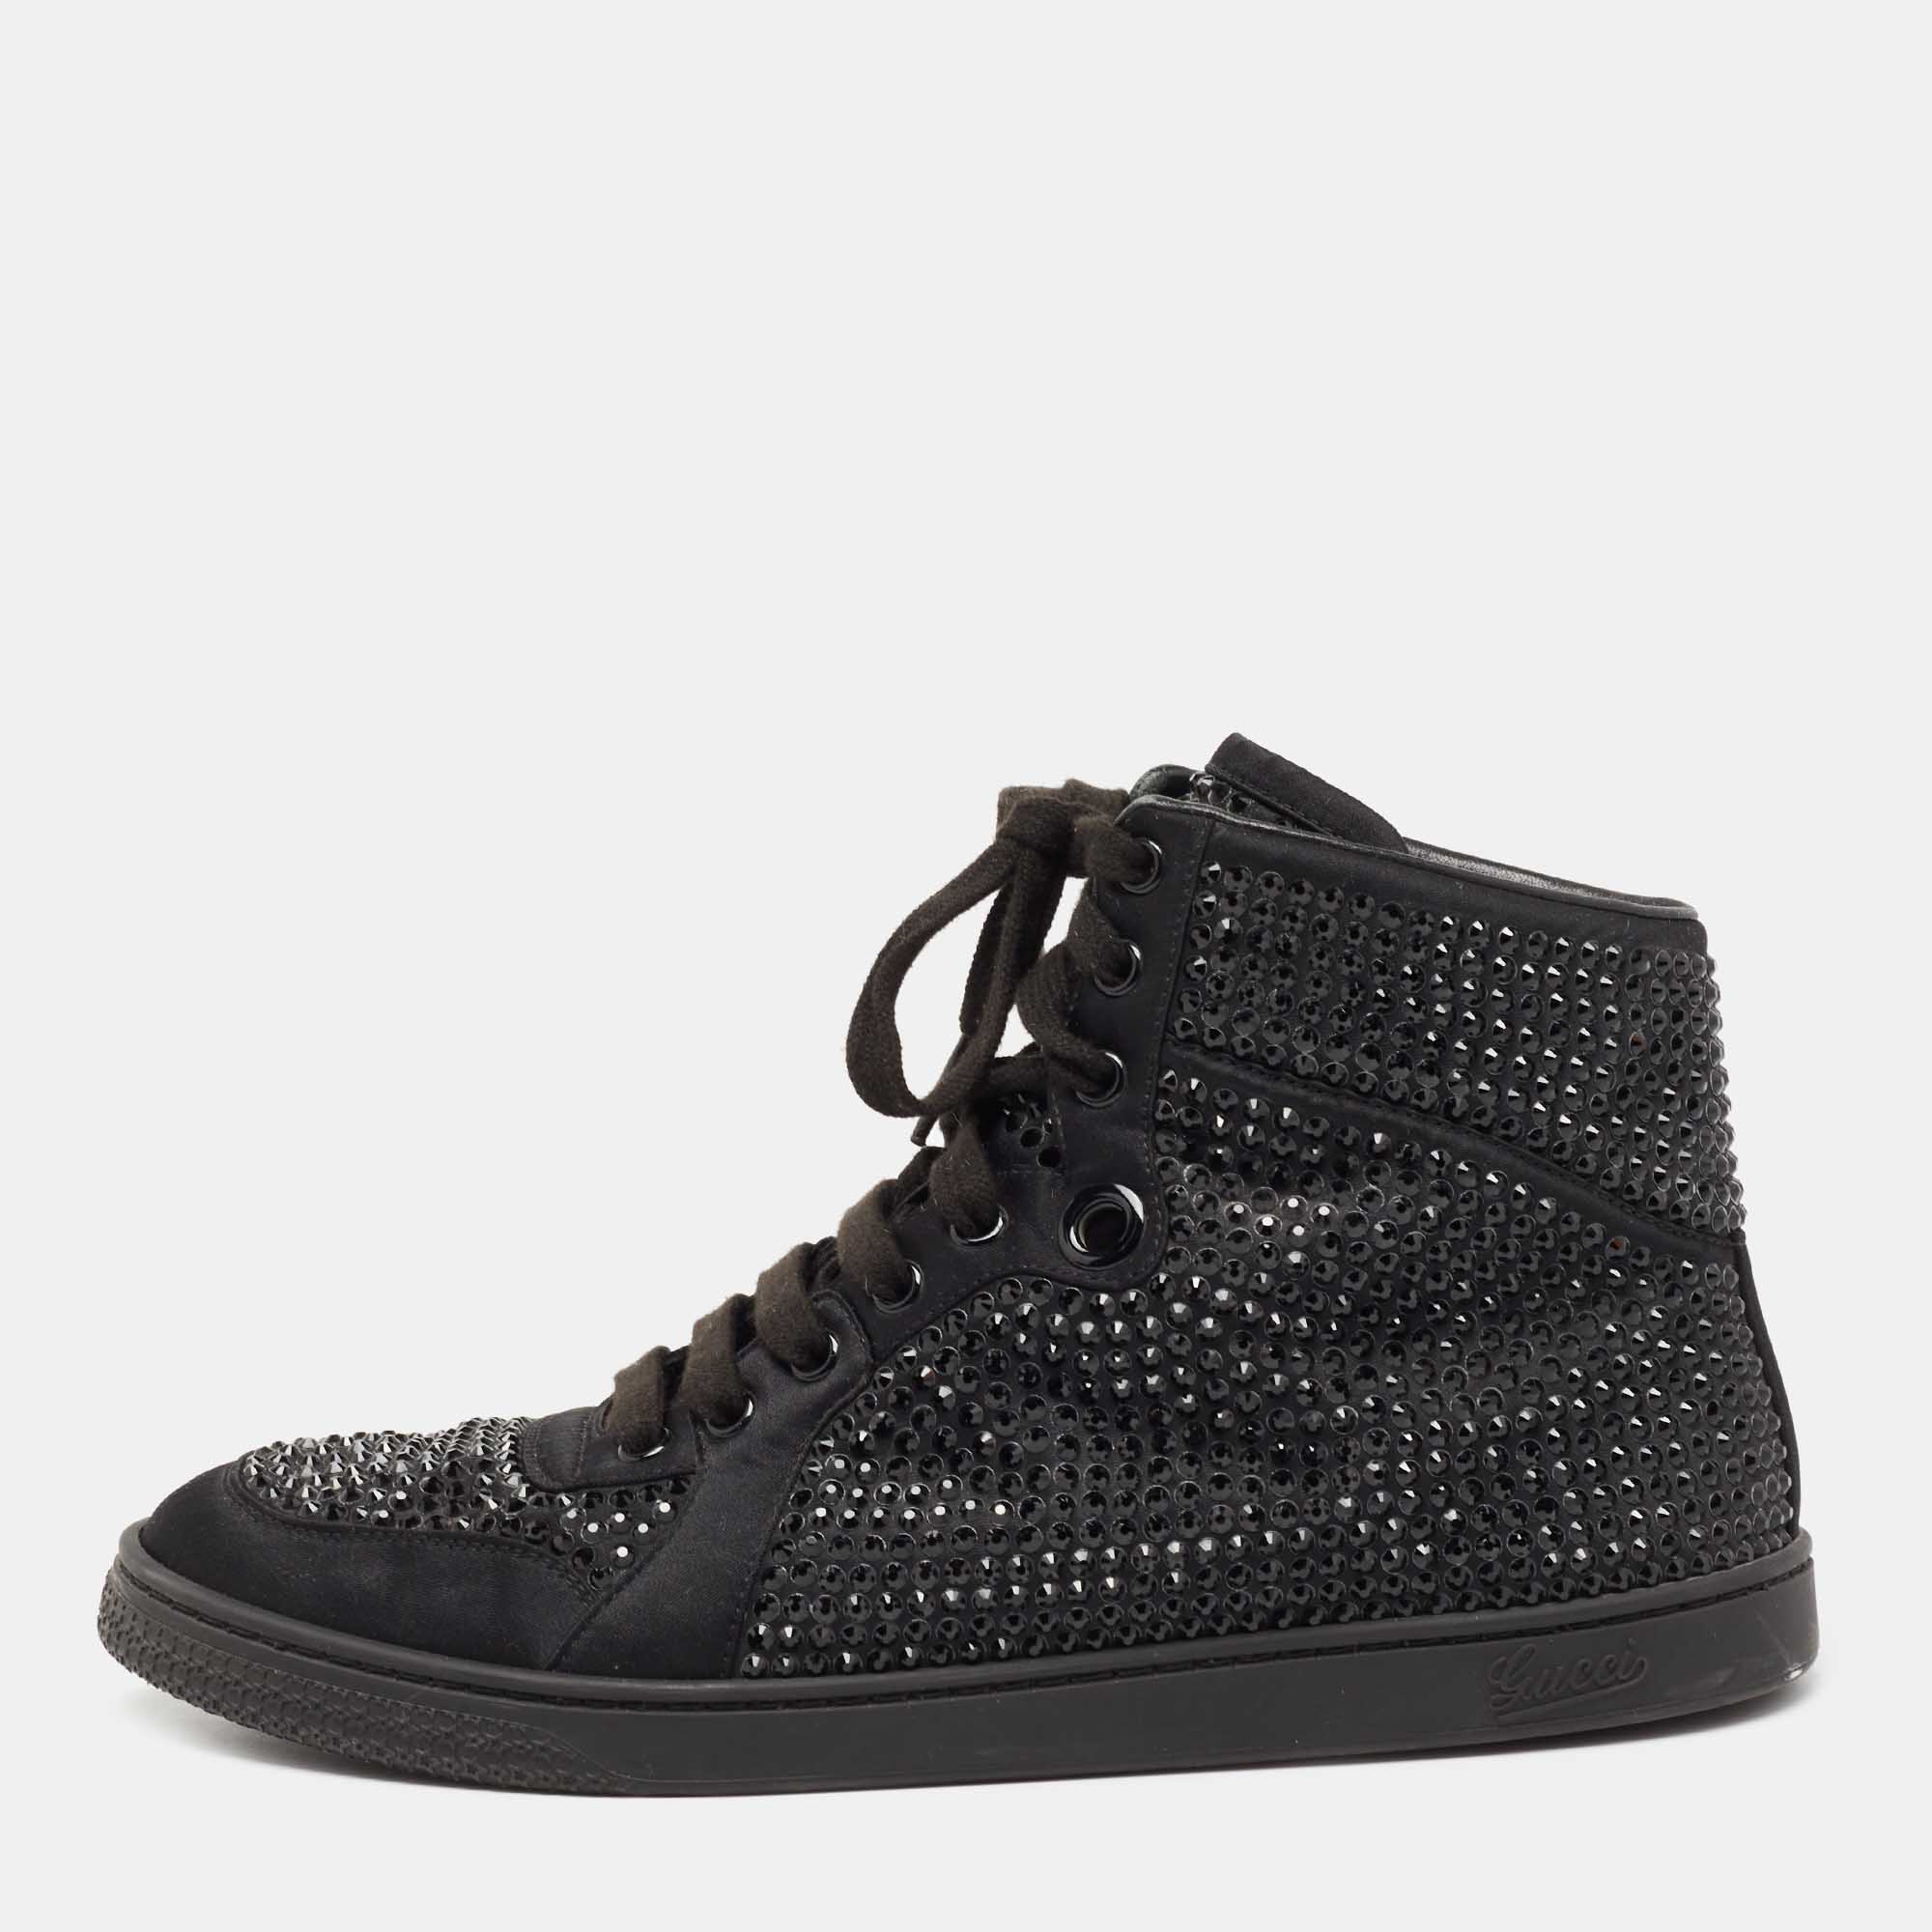 Gucci black satin crystal embellished coda high top sneakers size 39